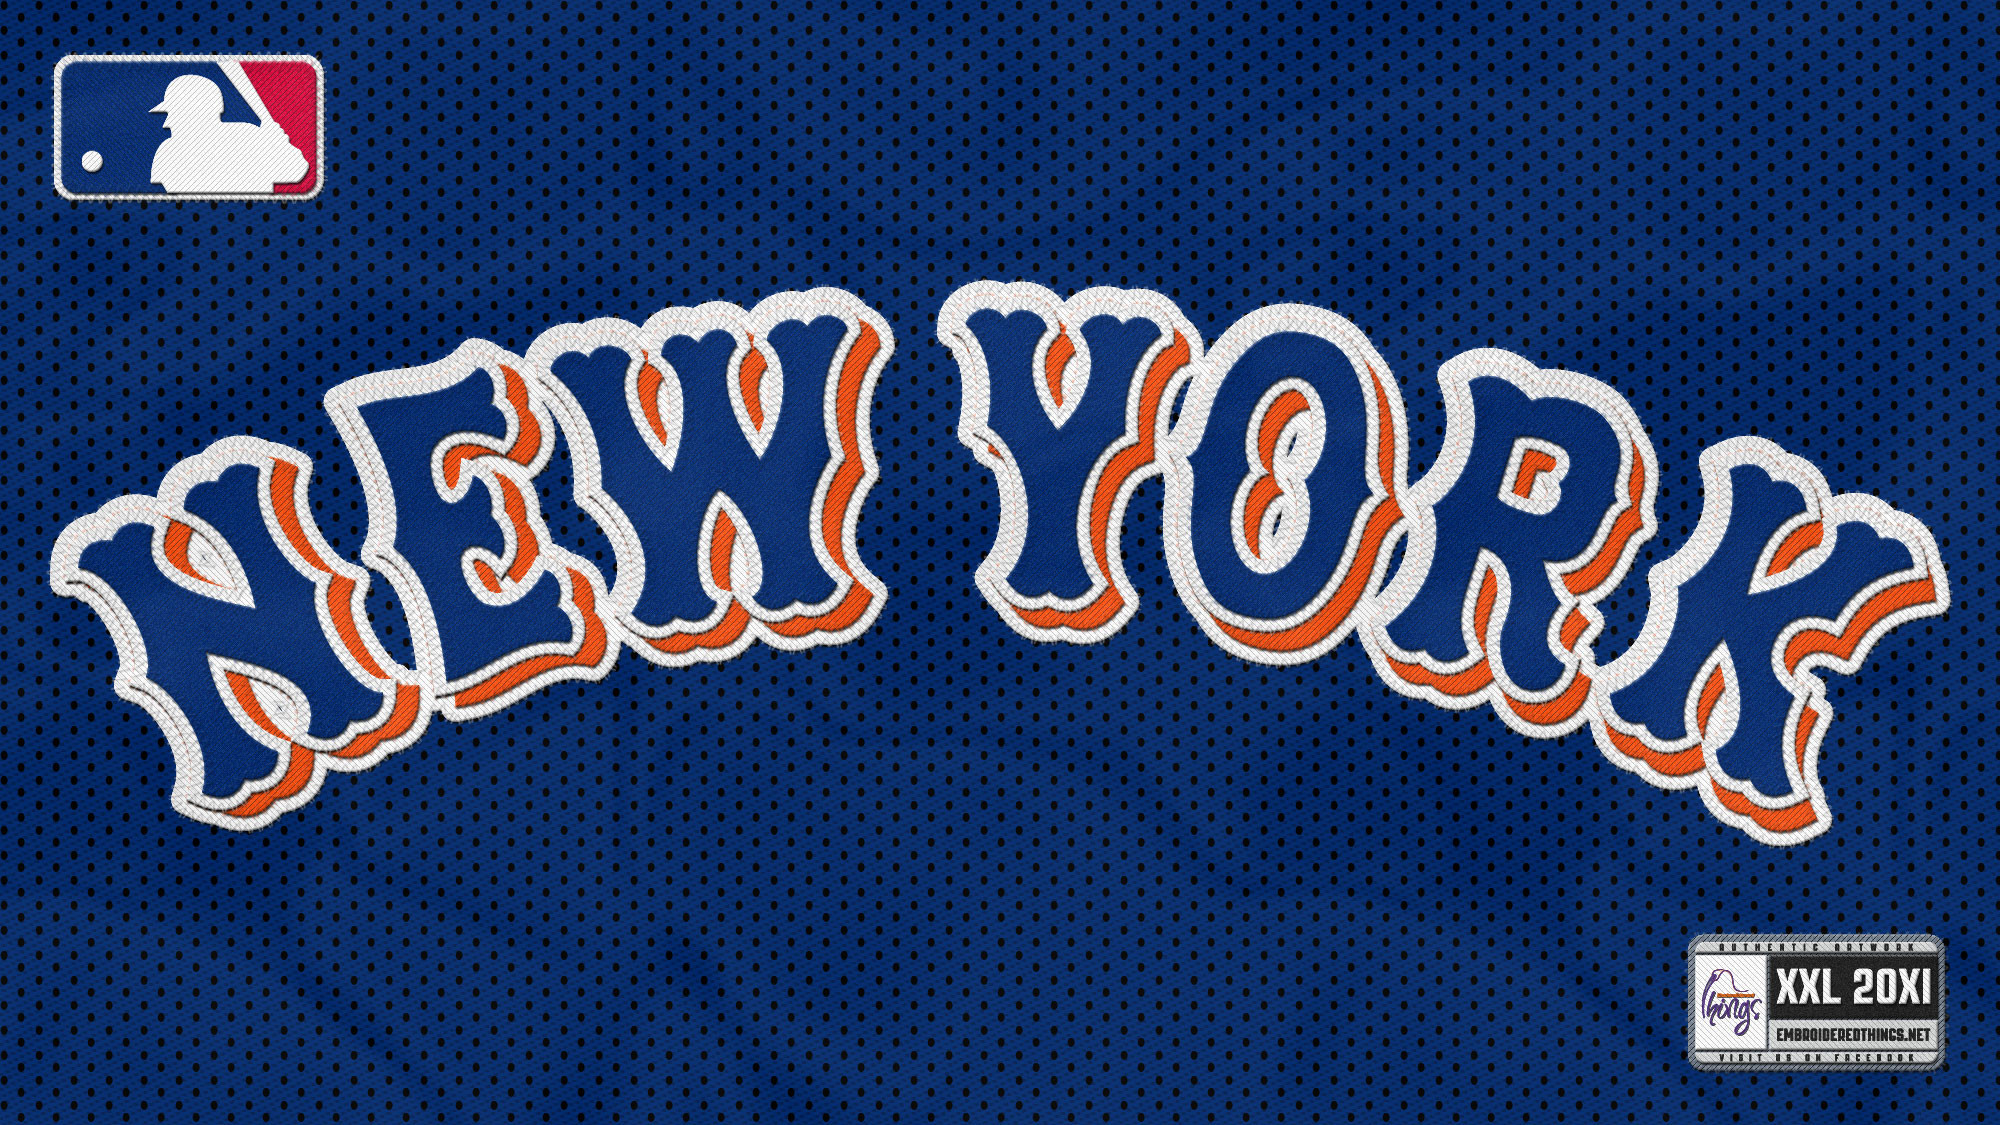 New York Mets on X Fresh new wallpapers WallpaperWednesday  httpstcoOY58gTIWqo  X